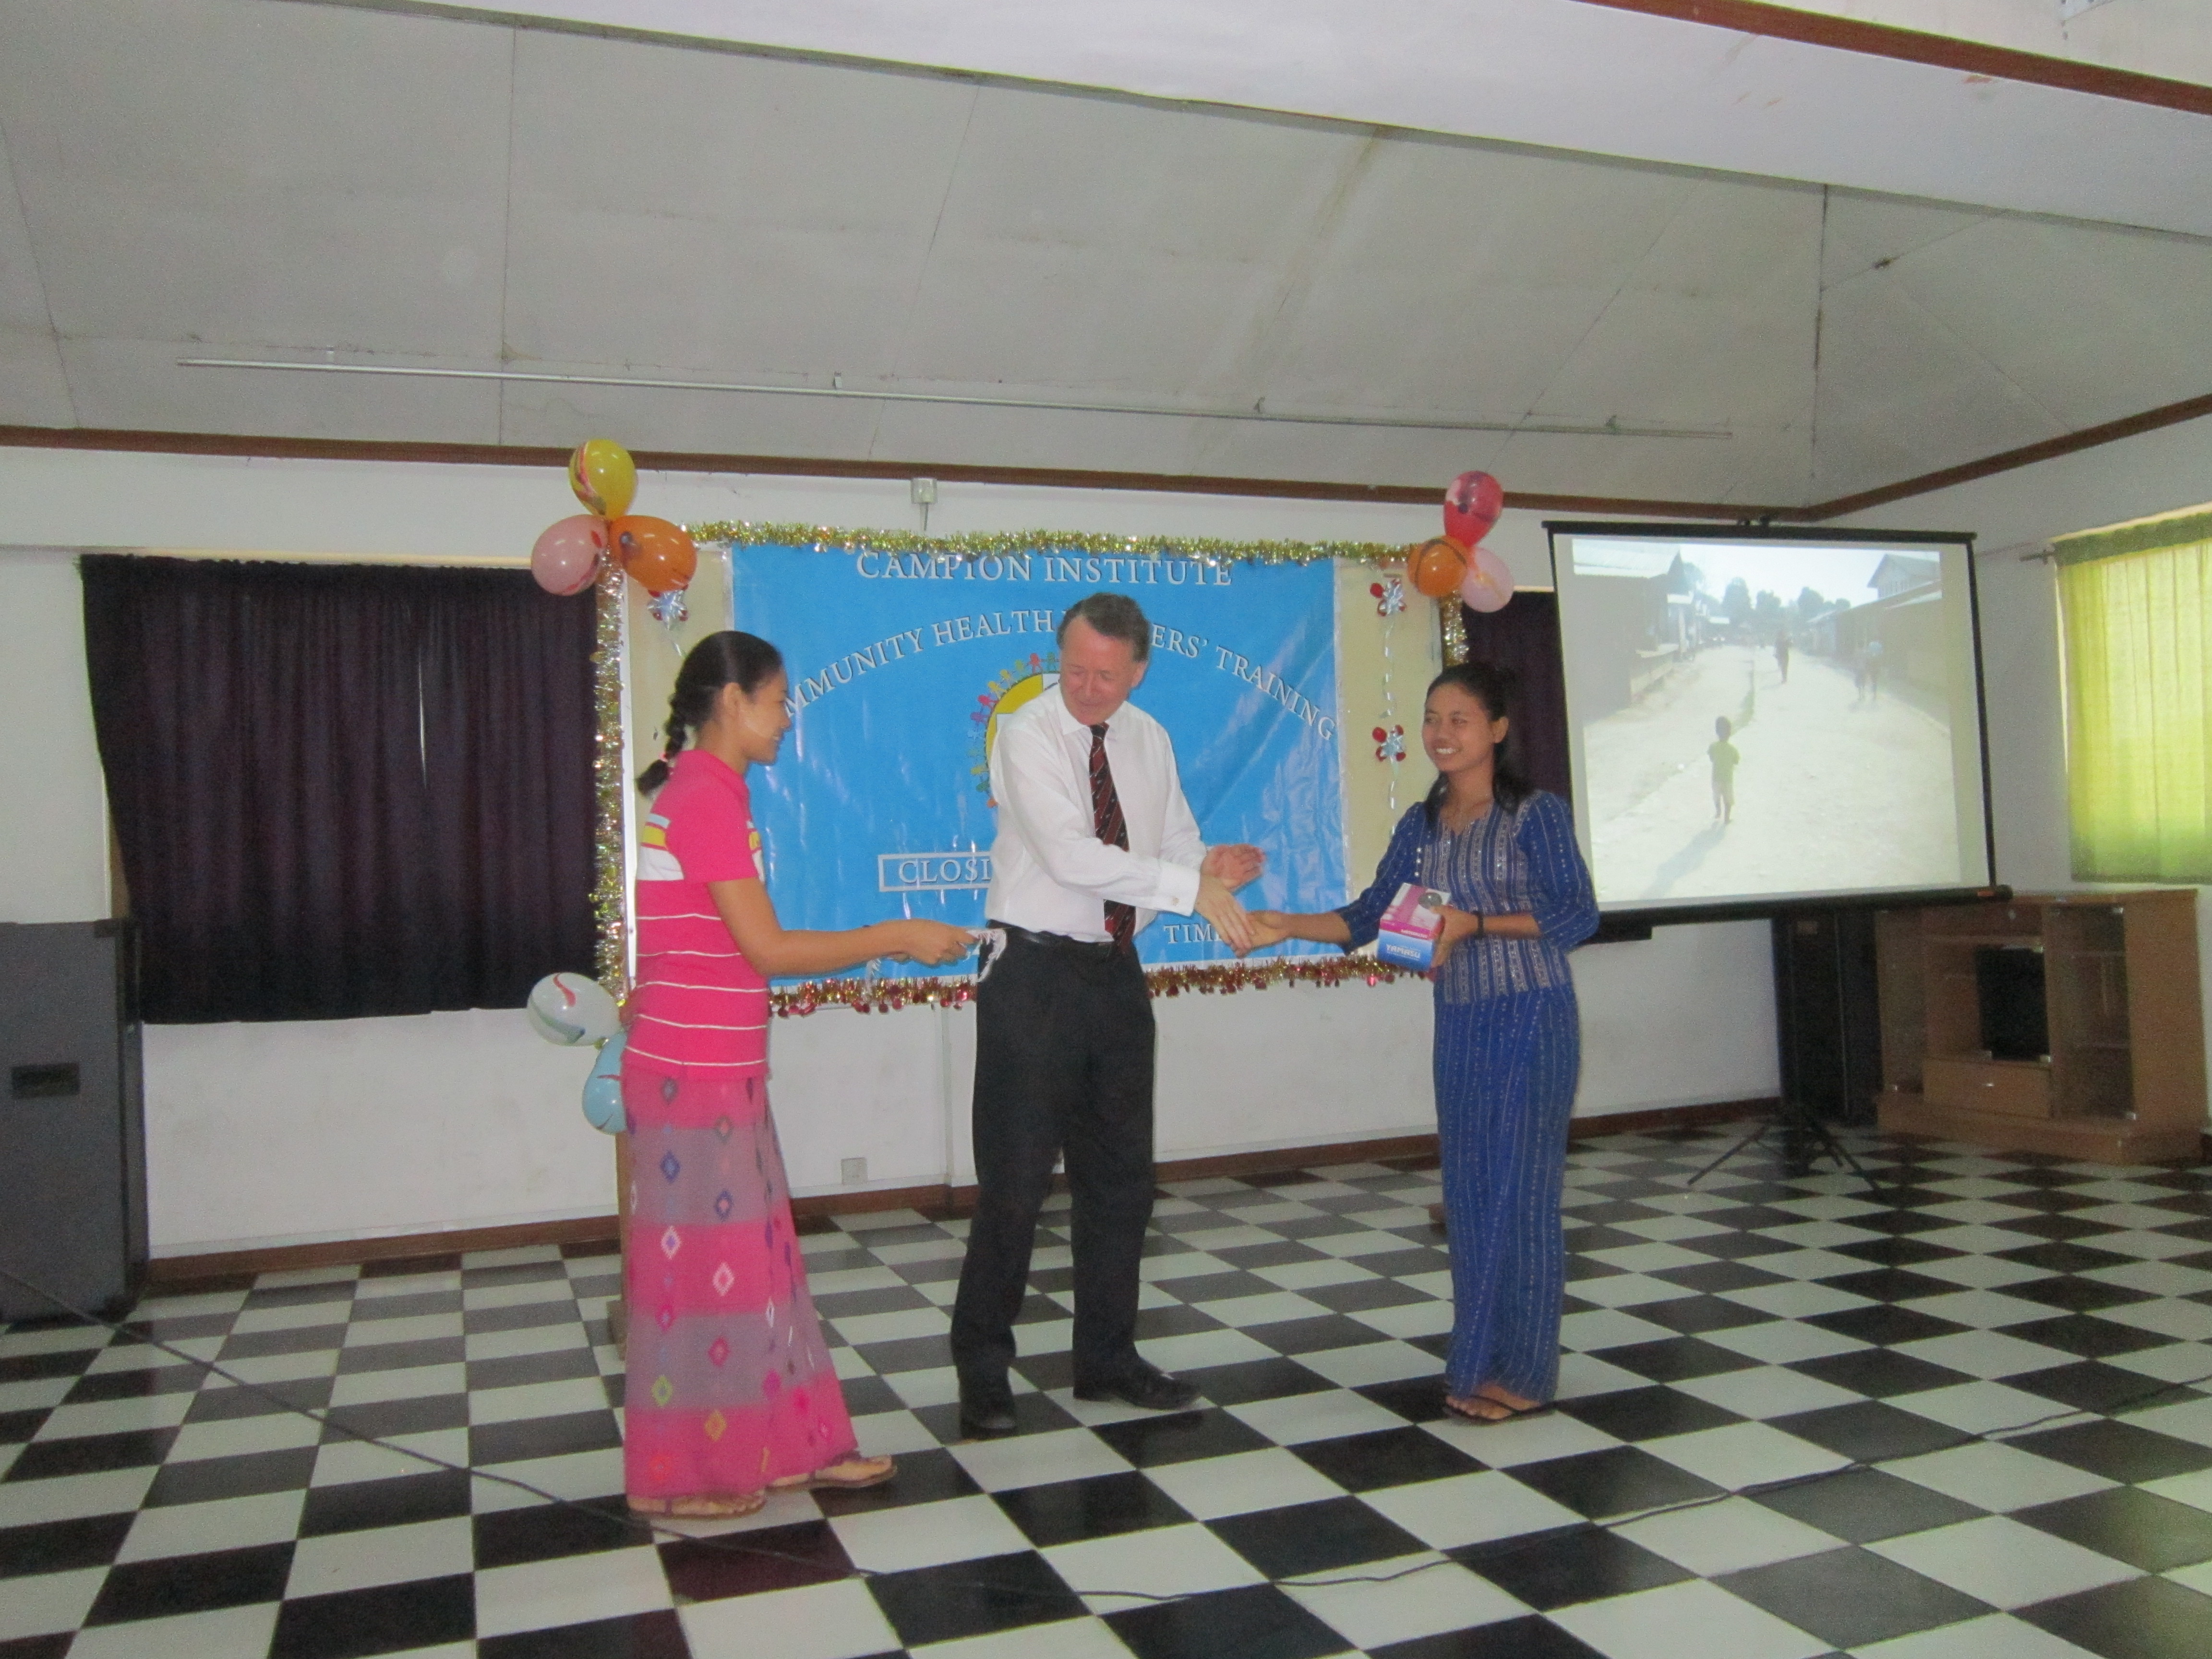 Presenting community health awards at the Campion Institute, Rangoon